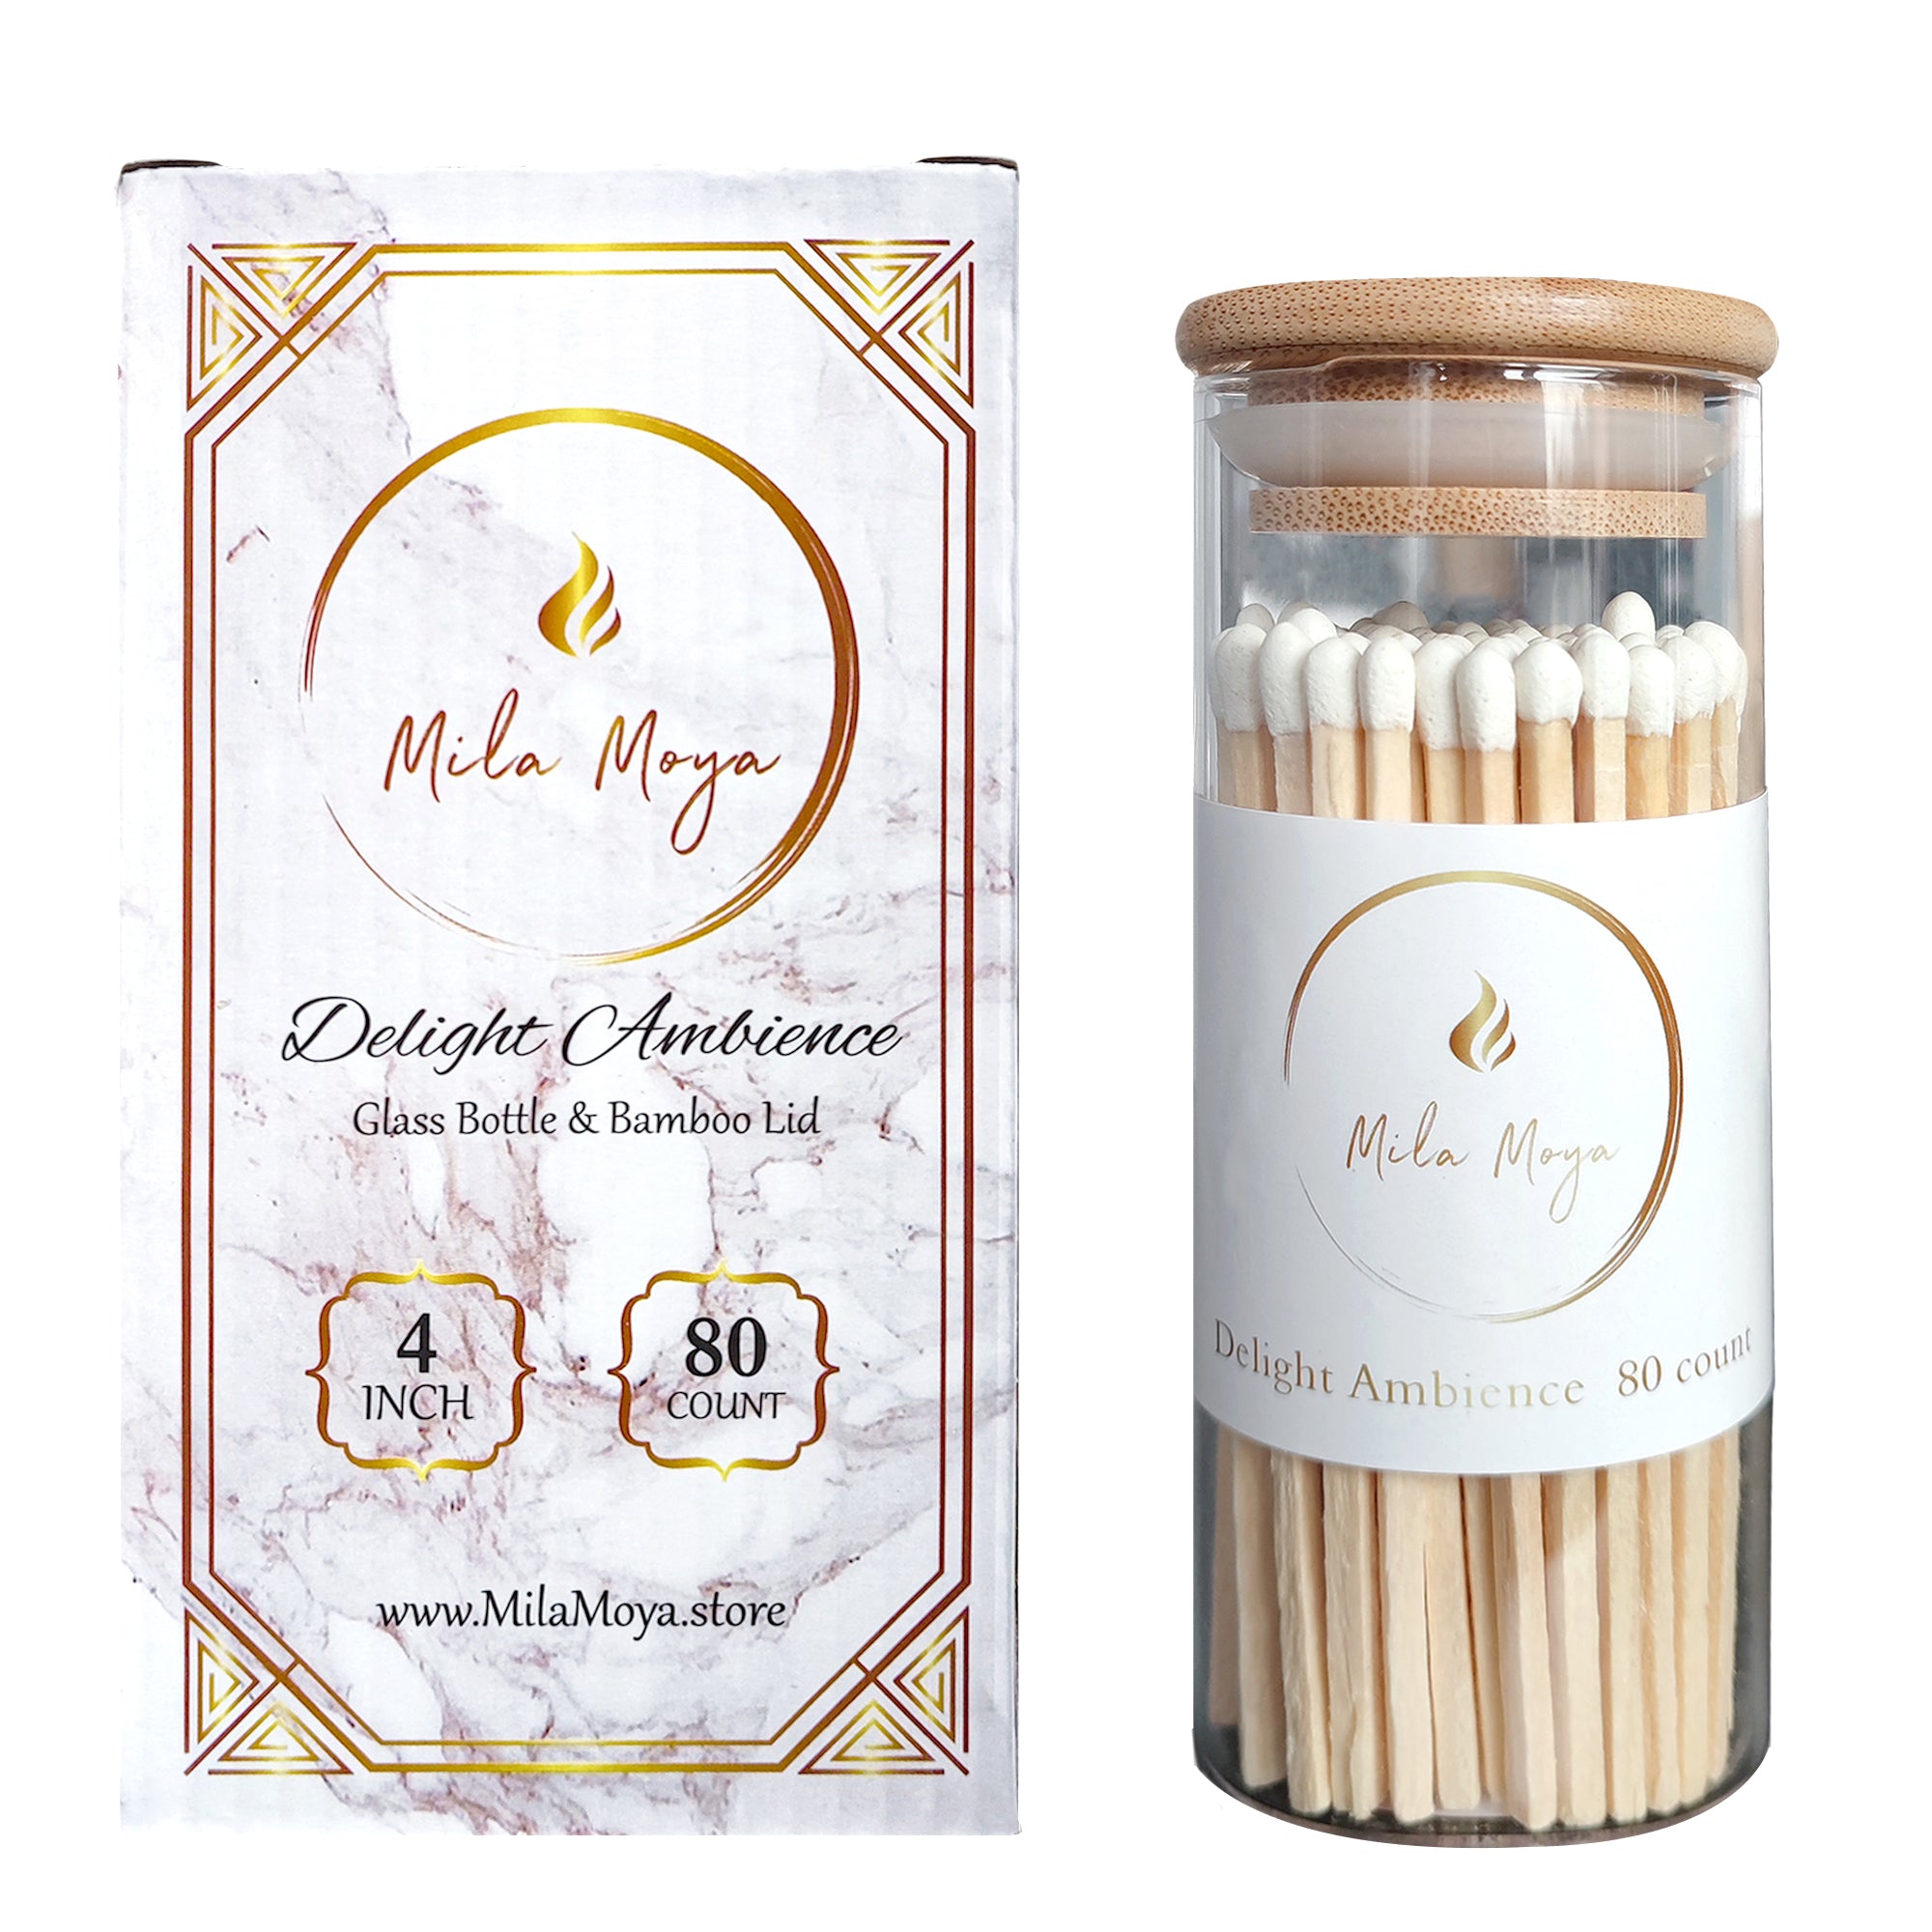 Multicolor Rainbow Blend Decorative Matches 120 Small Premium Wooden  Matches Artisan Matches for Candles Safety Matches for Lighting Candles  with